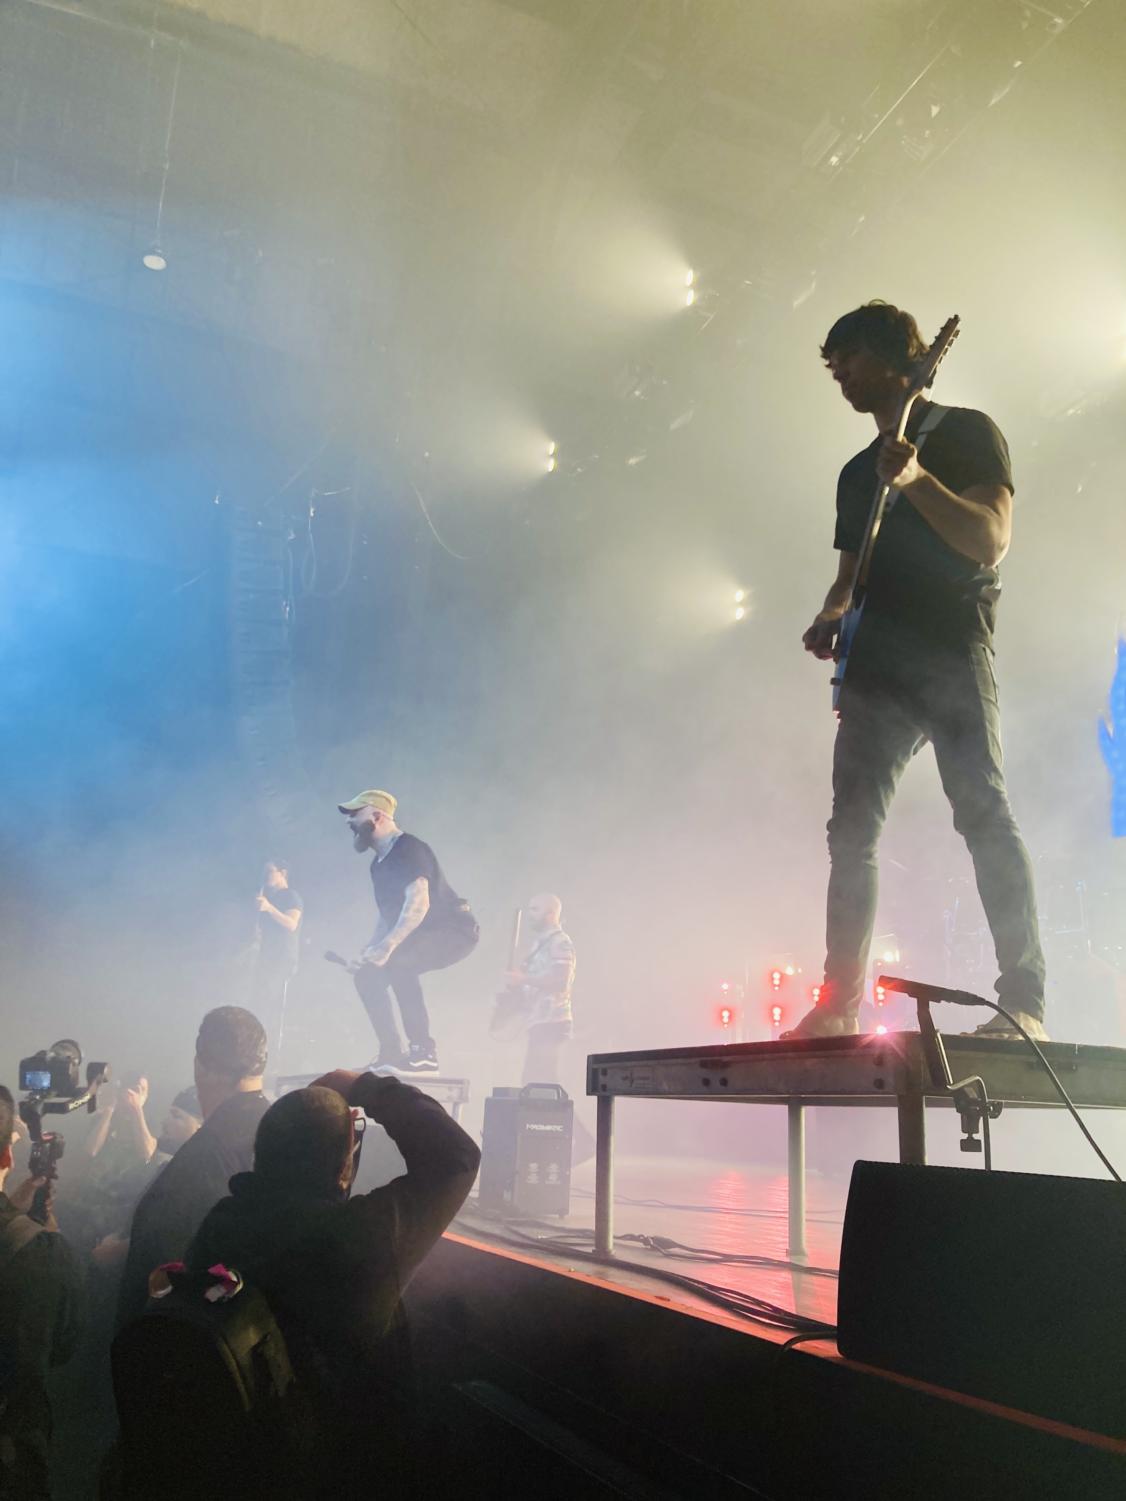 Journalists photograph opening band August Burns Red through smoke.